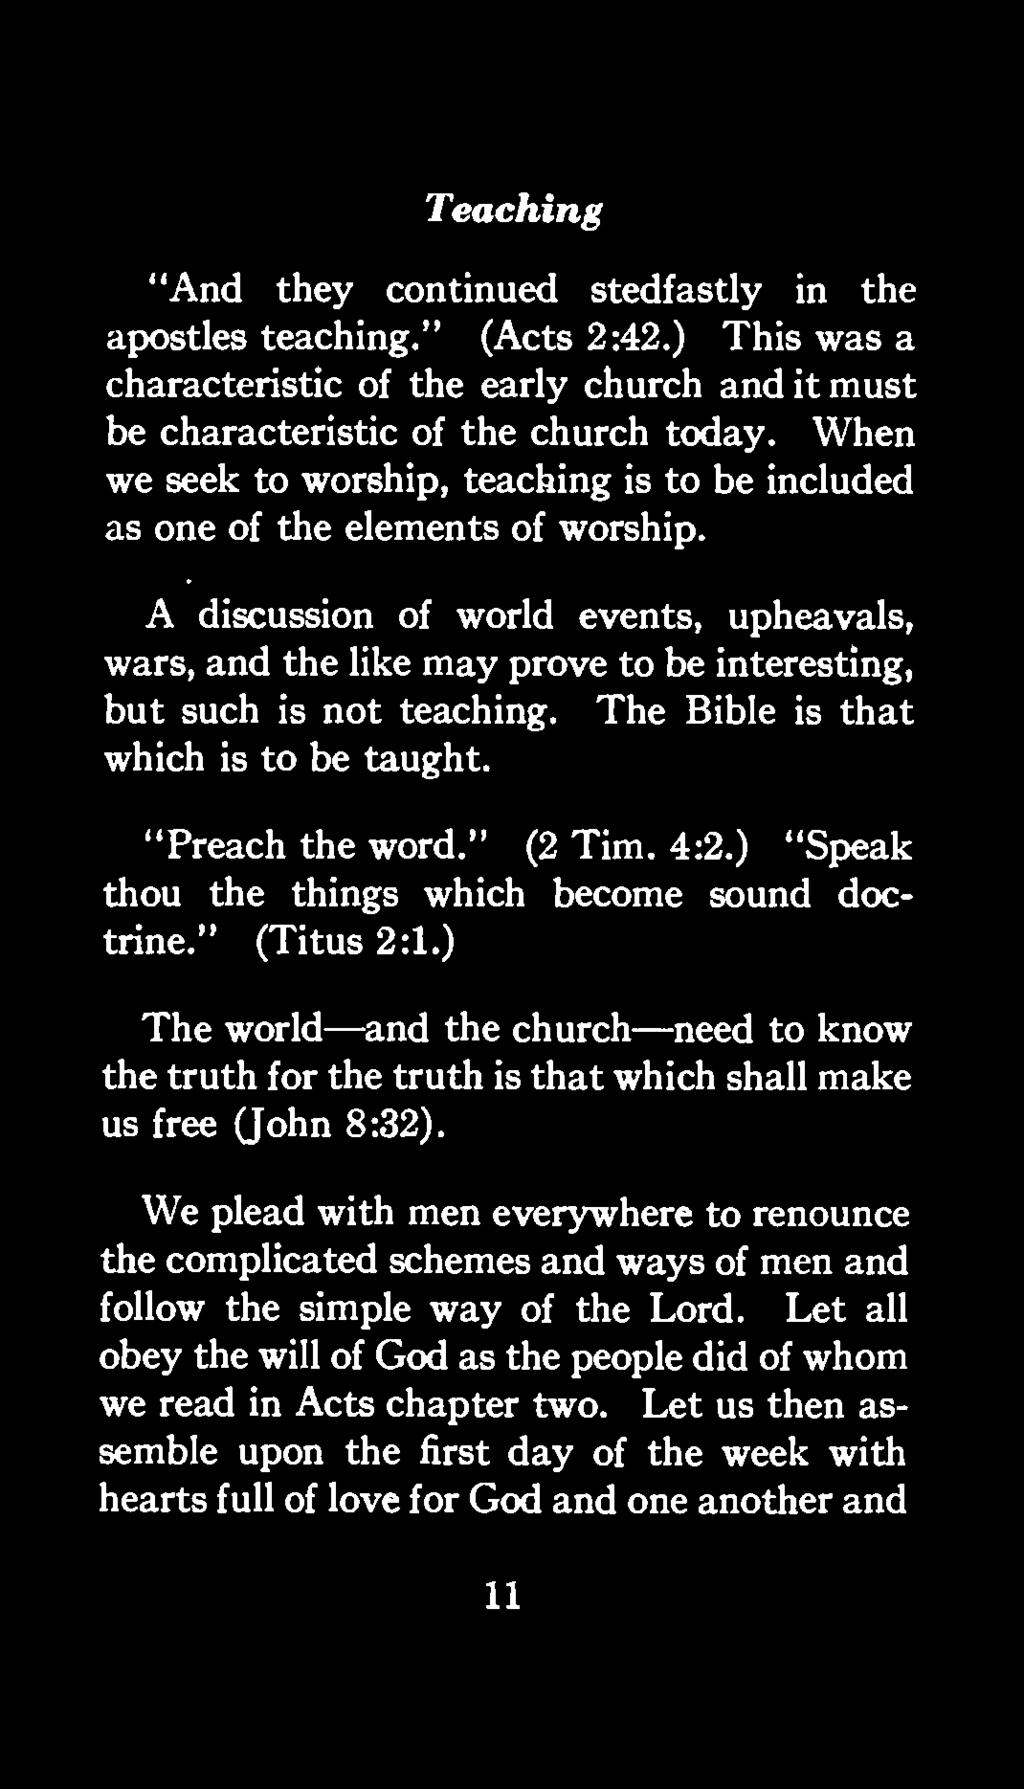 "Preach the word." (2 Tim. 4:2.) "Speak thou the things which become sound doctrine." (Titus 2 :1.